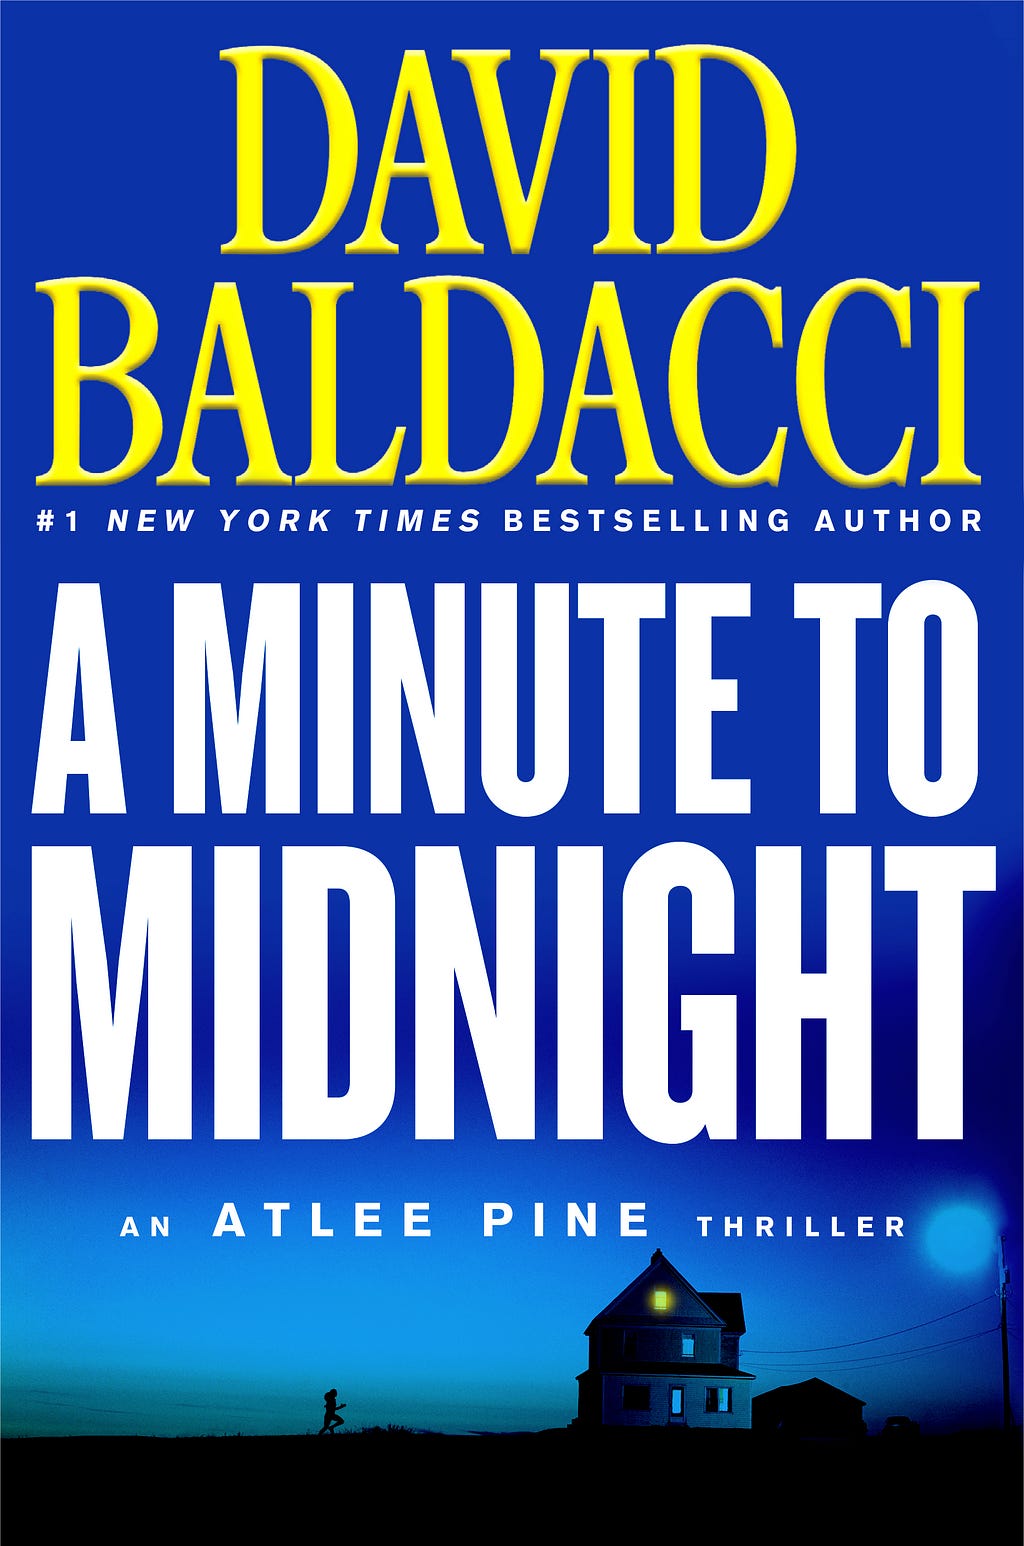 A Minute to Midnight (Atlee Pine #2) PDF